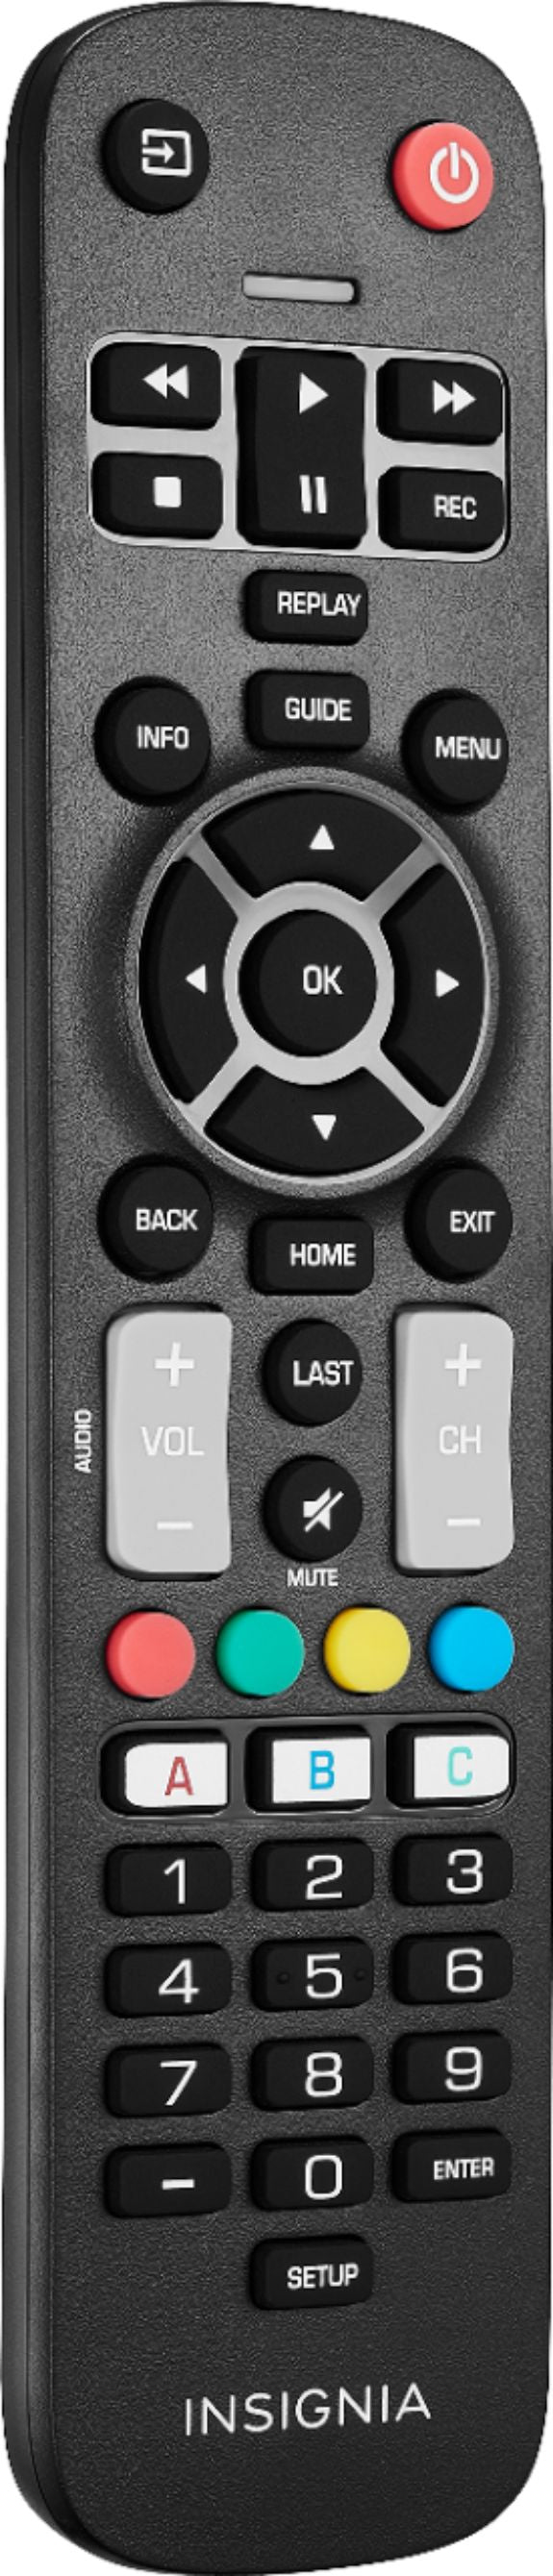 Insignia™ - Replacement Remote for Insignia and Dynex TVs - Black_3